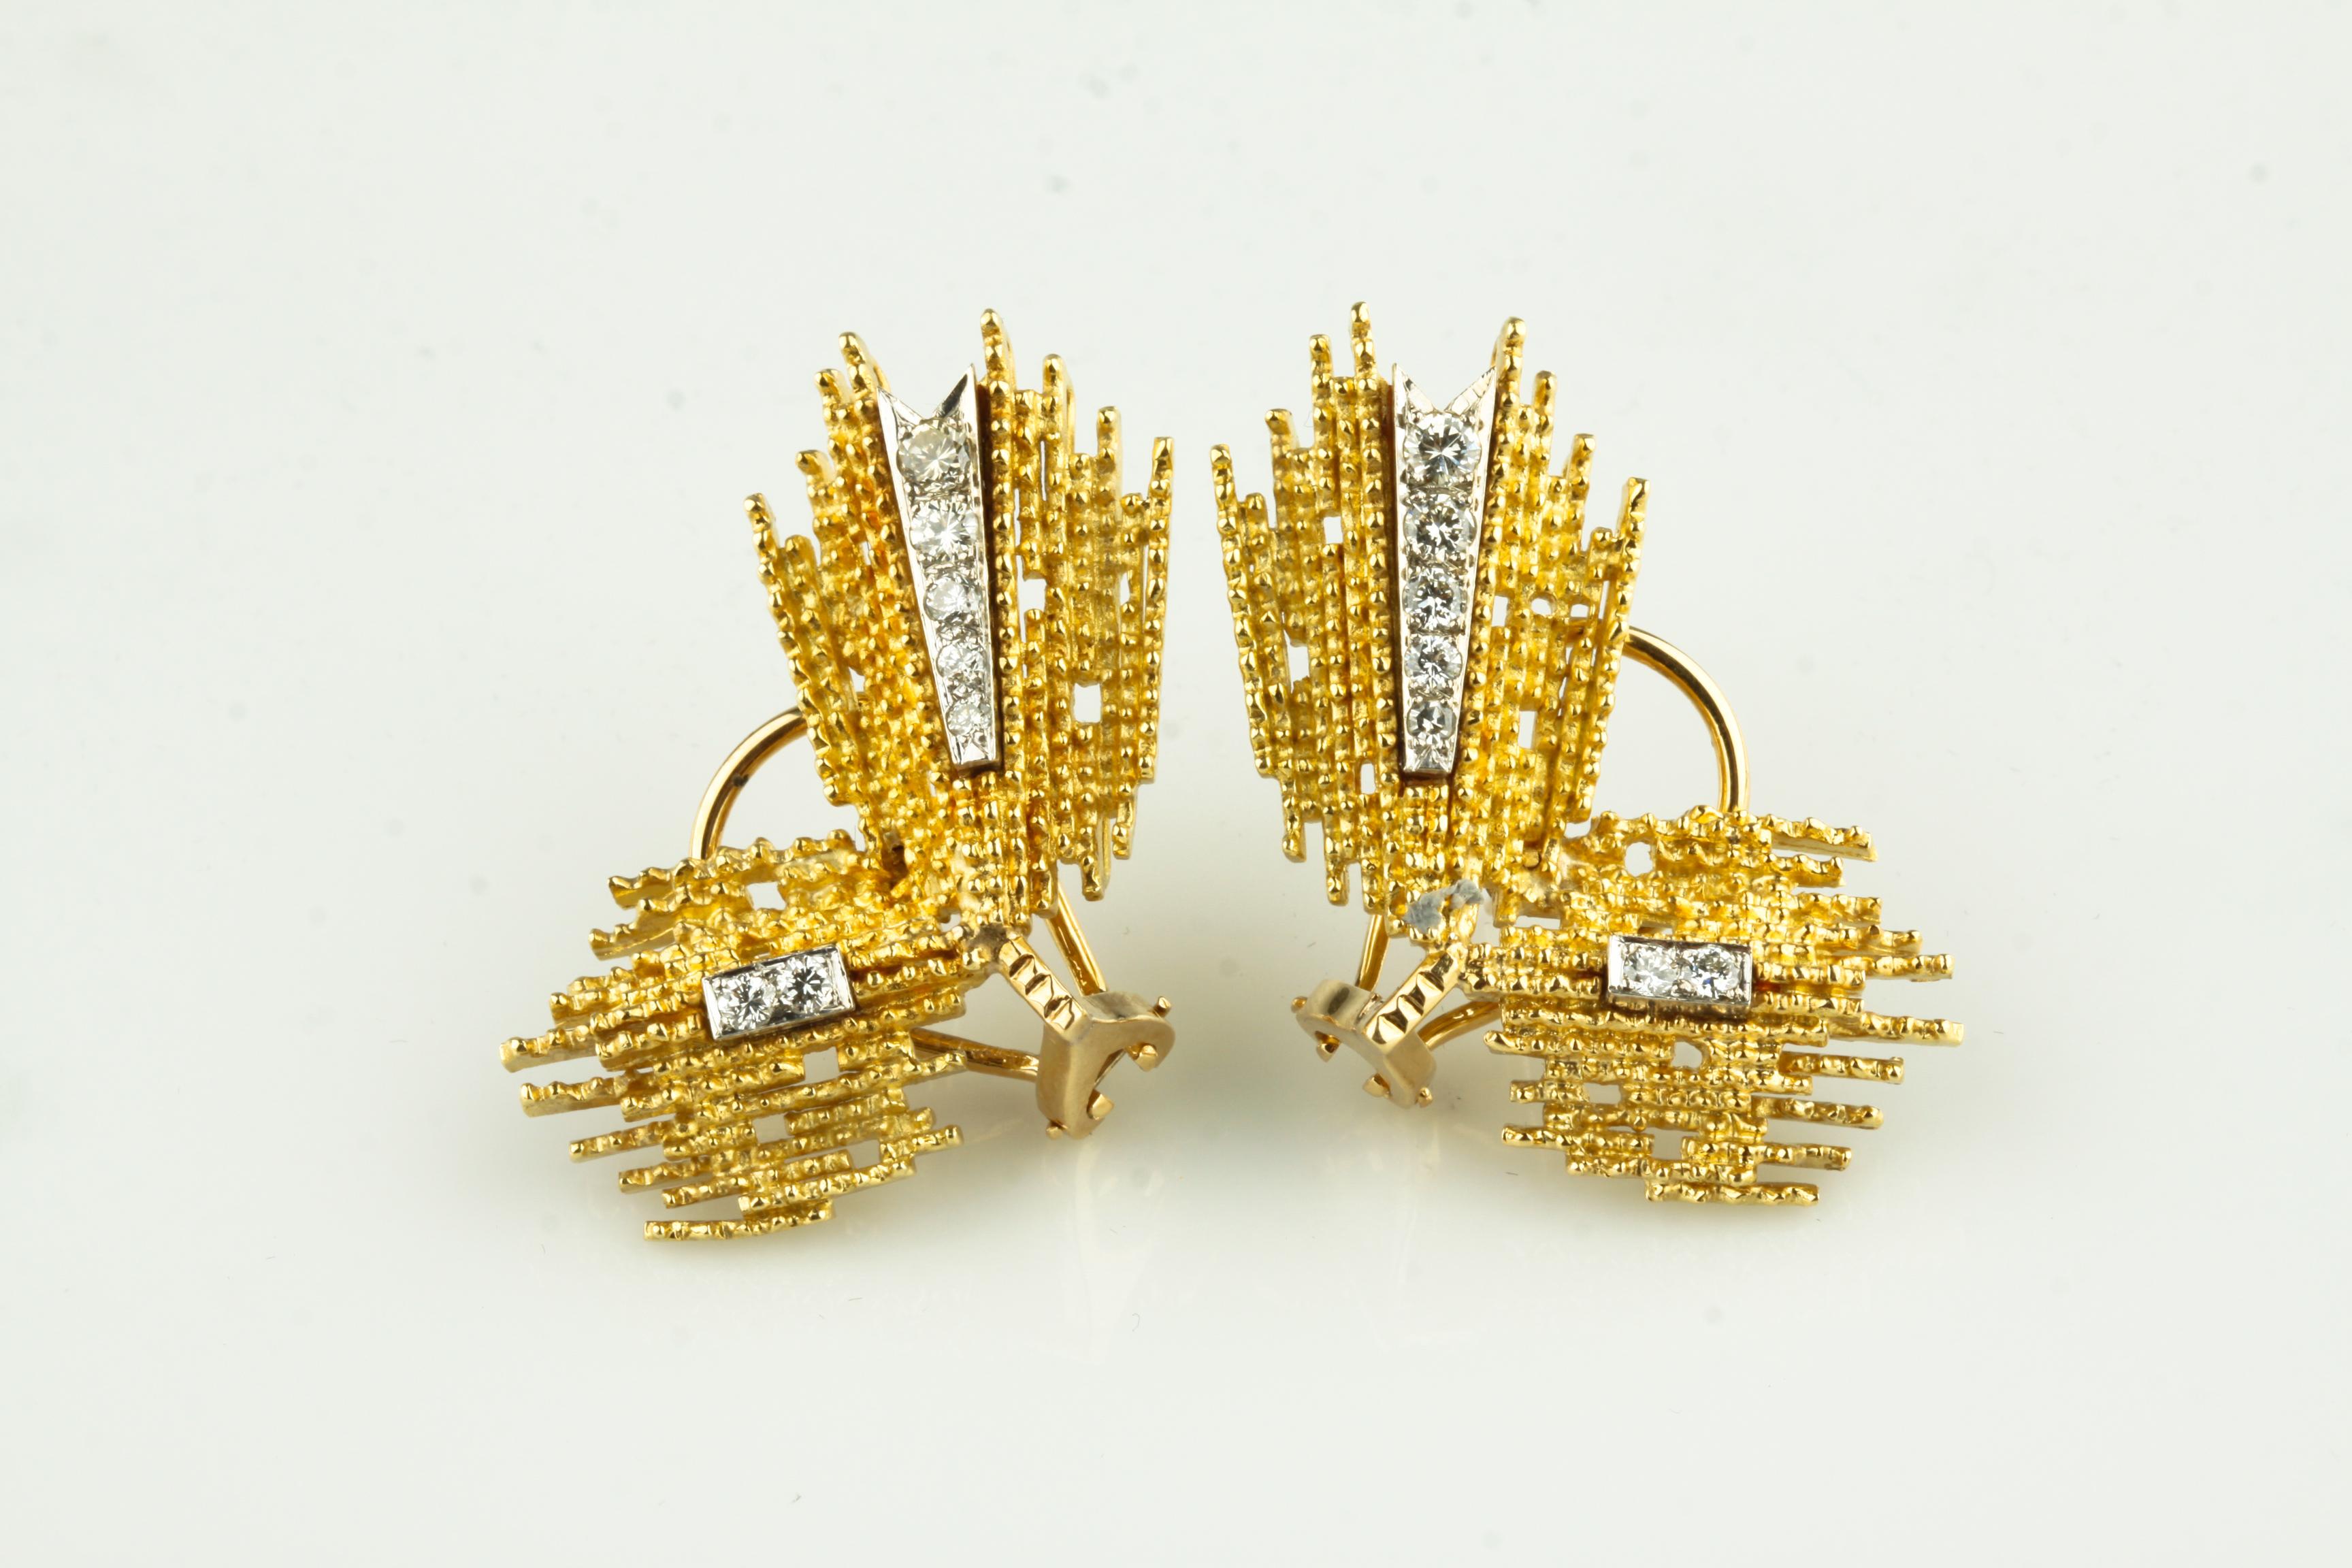 Round Cut 1.80 Carat Diamond Brooch and Earring Set in Yellow Gold and Platinum, 1960s For Sale